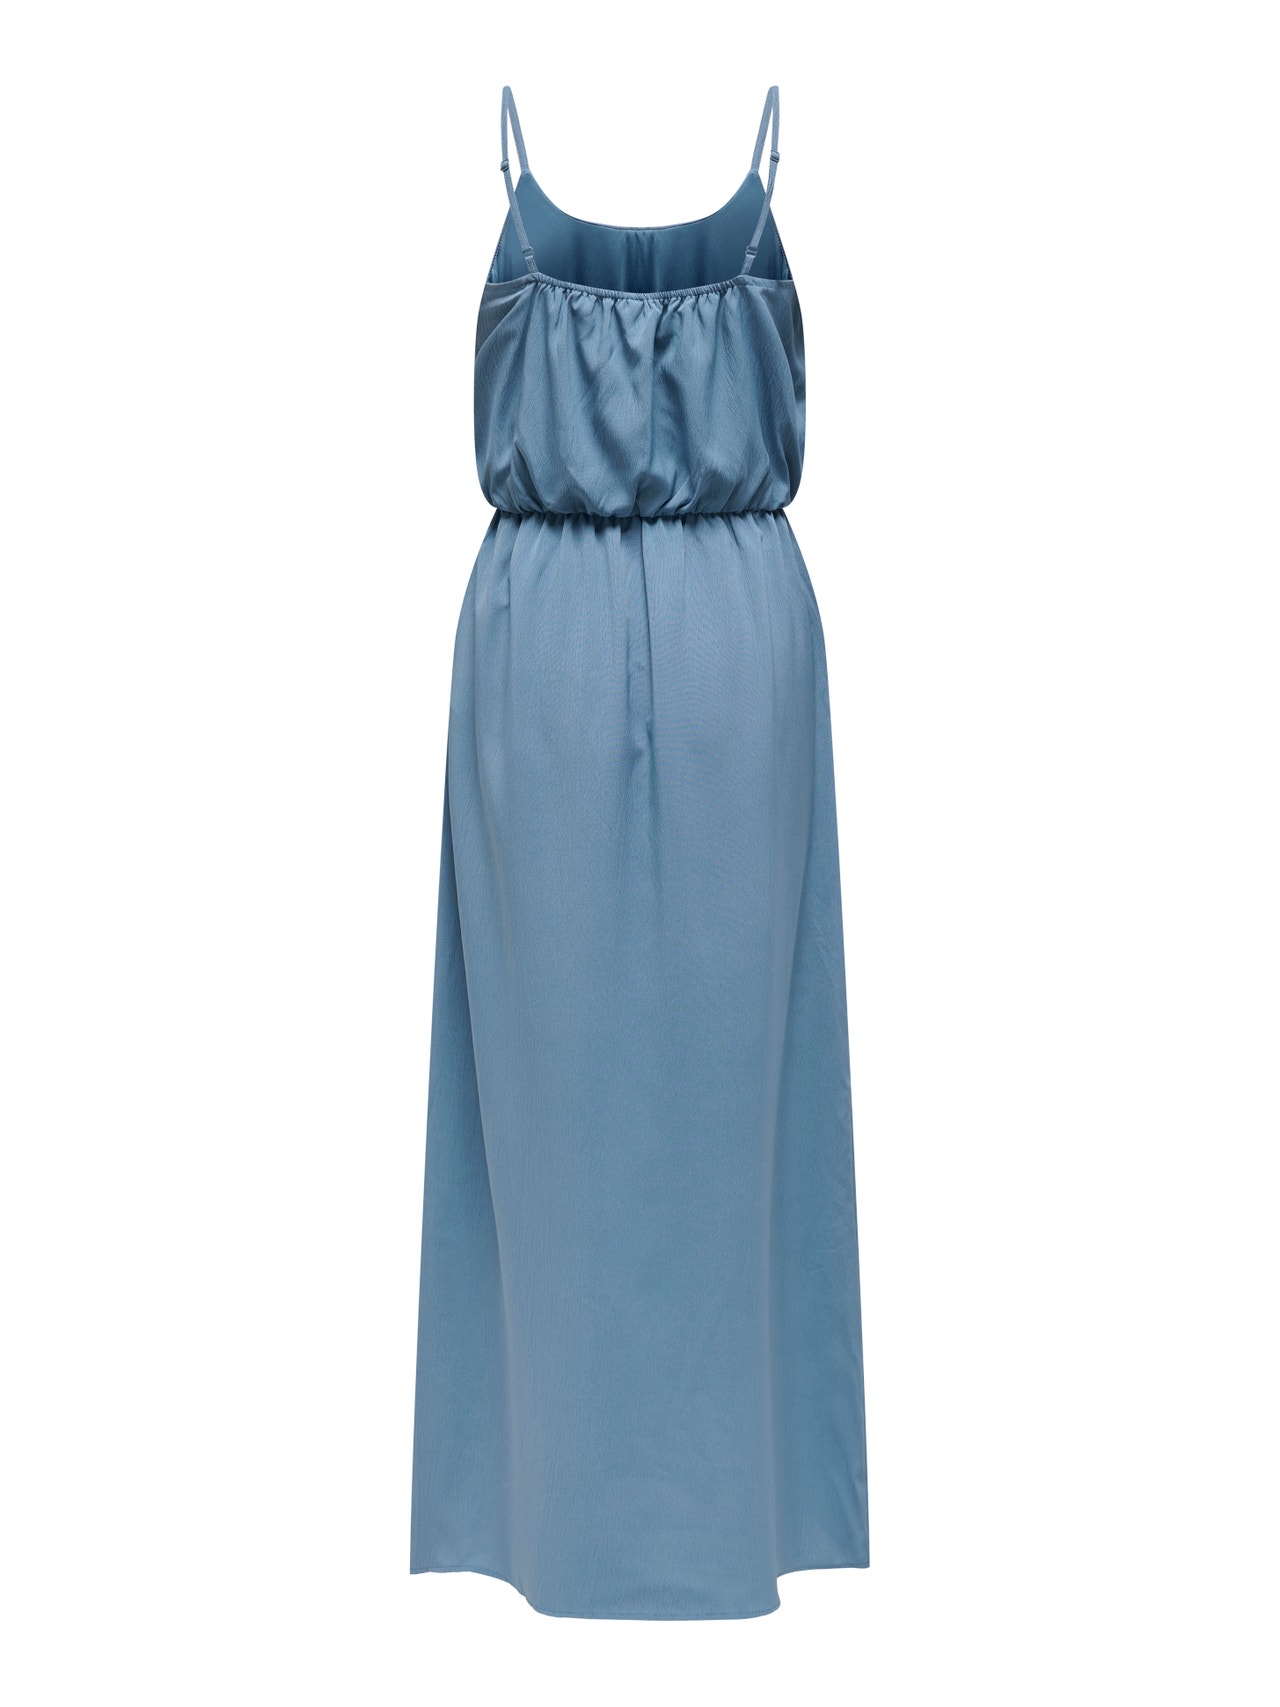 ONLY Midi dress with shoulder straps -Coronet Blue - 15335556